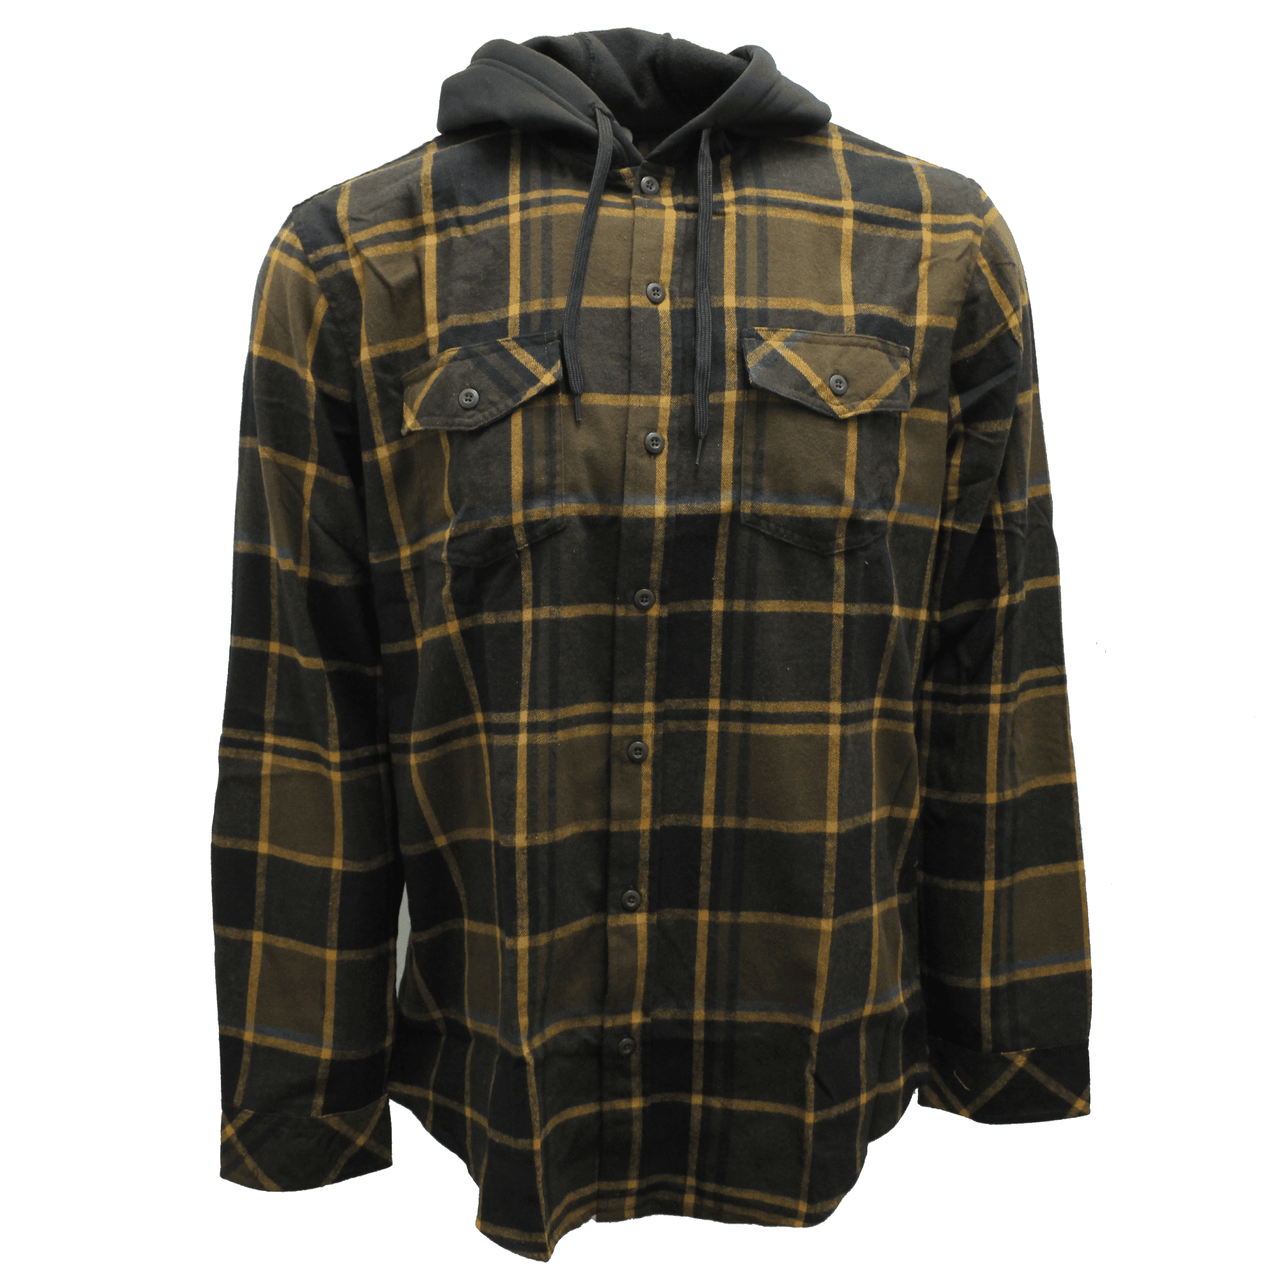 Black and Yellow Hooded Flannel